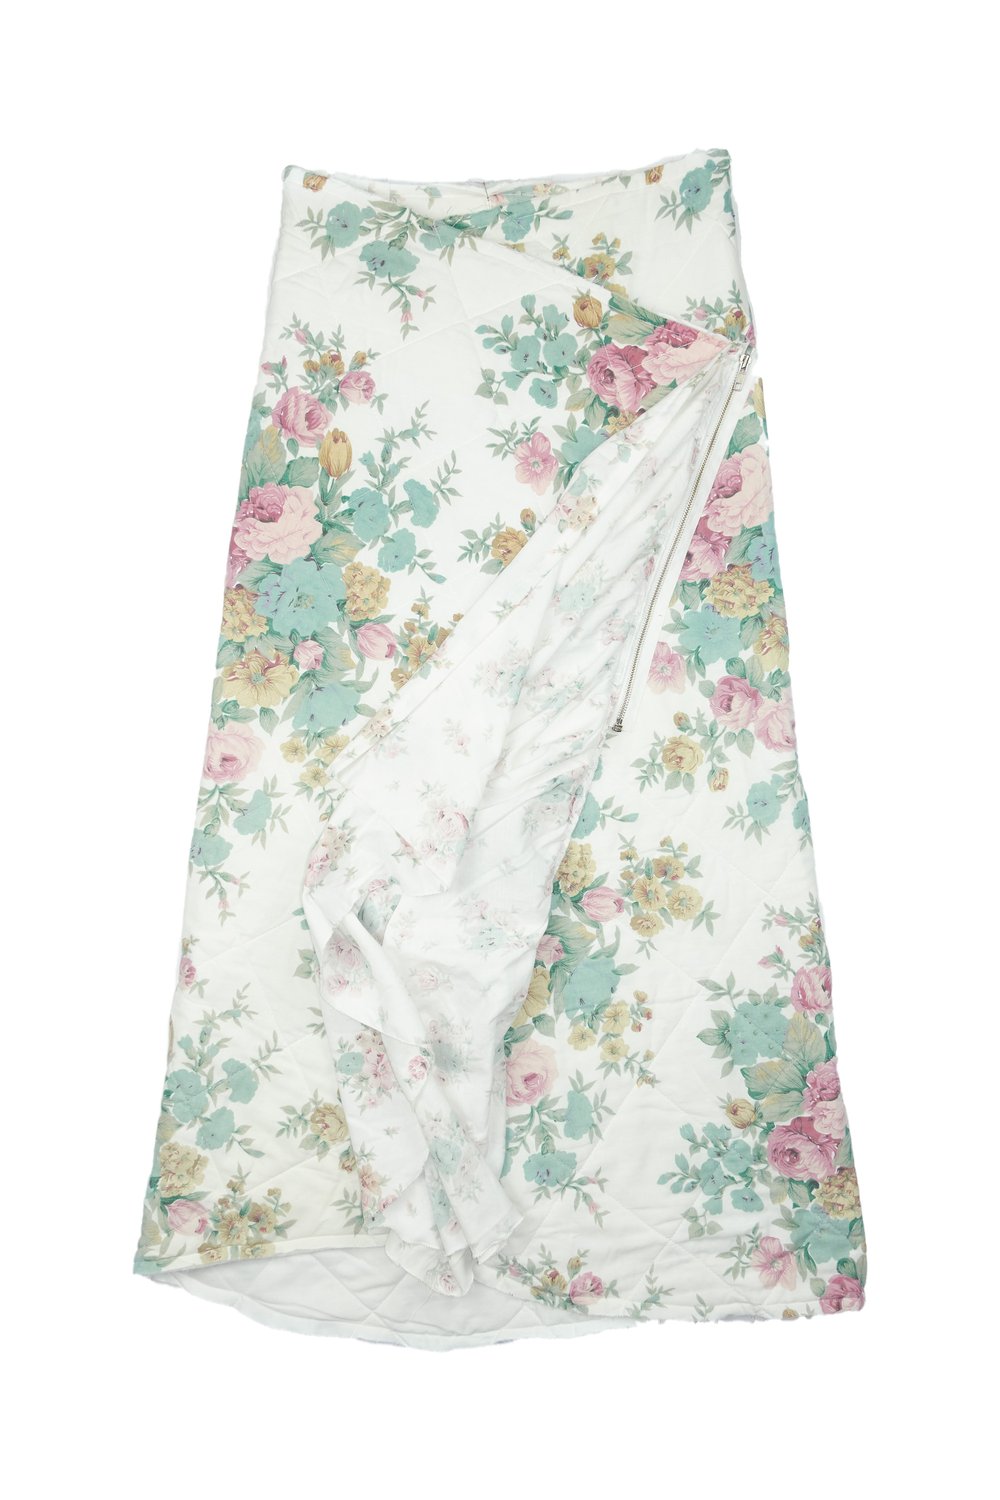 Mineral Tufts floral quilted wrap skirt